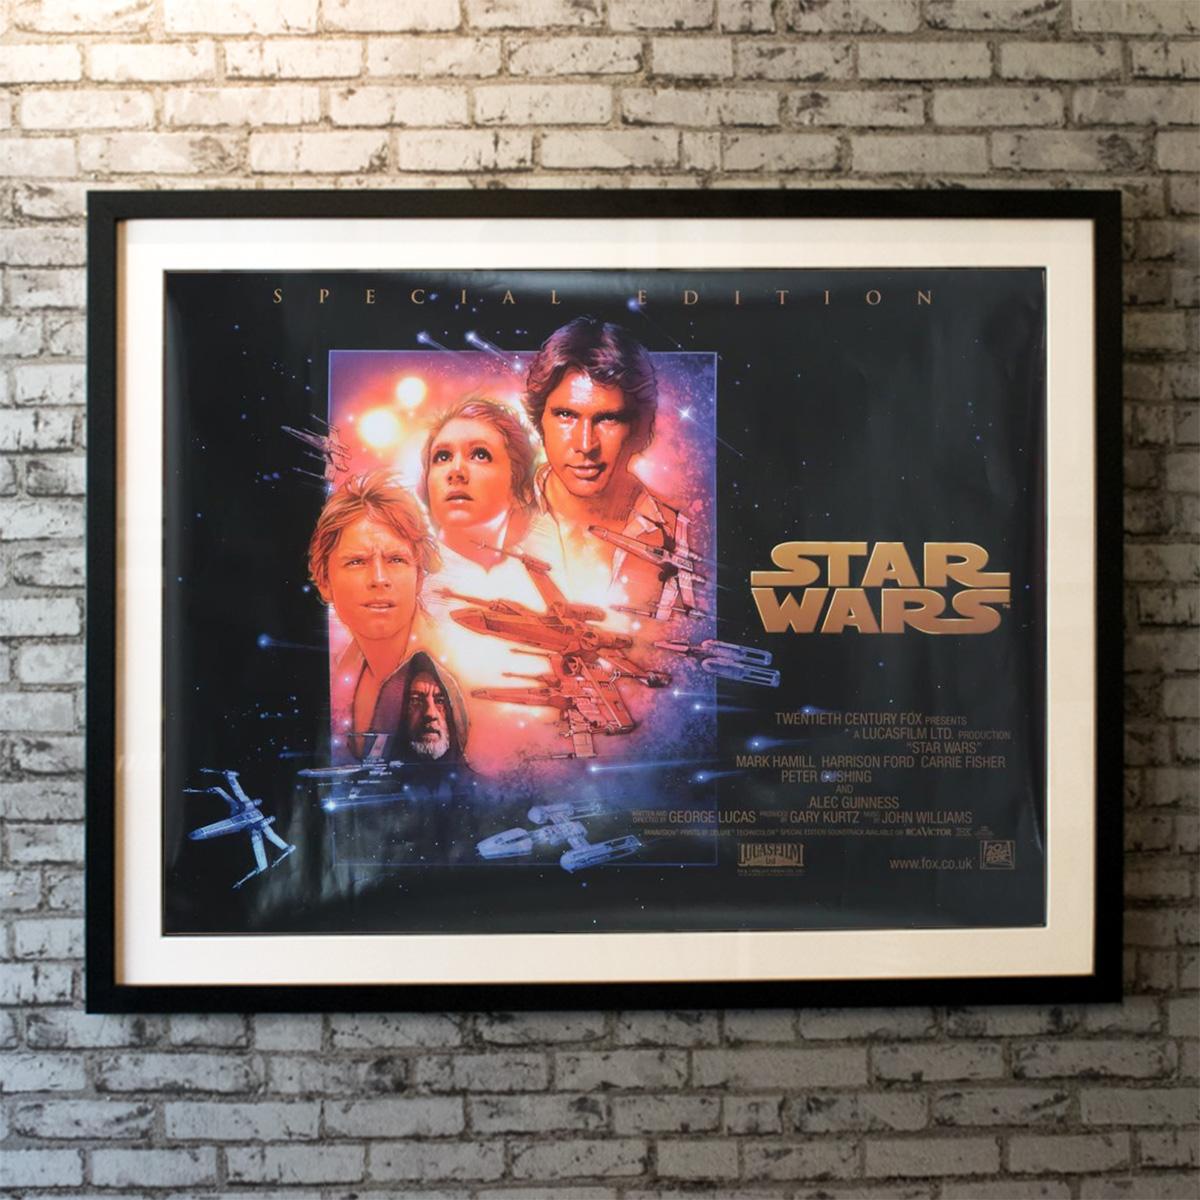 After Princess Leia, the leader of the Rebel Alliance, is held hostage by Darth Vader, Luke and Han Solo must free her and destroy the powerful weapon created by the Galactic Empire.

Linen-backing: £250